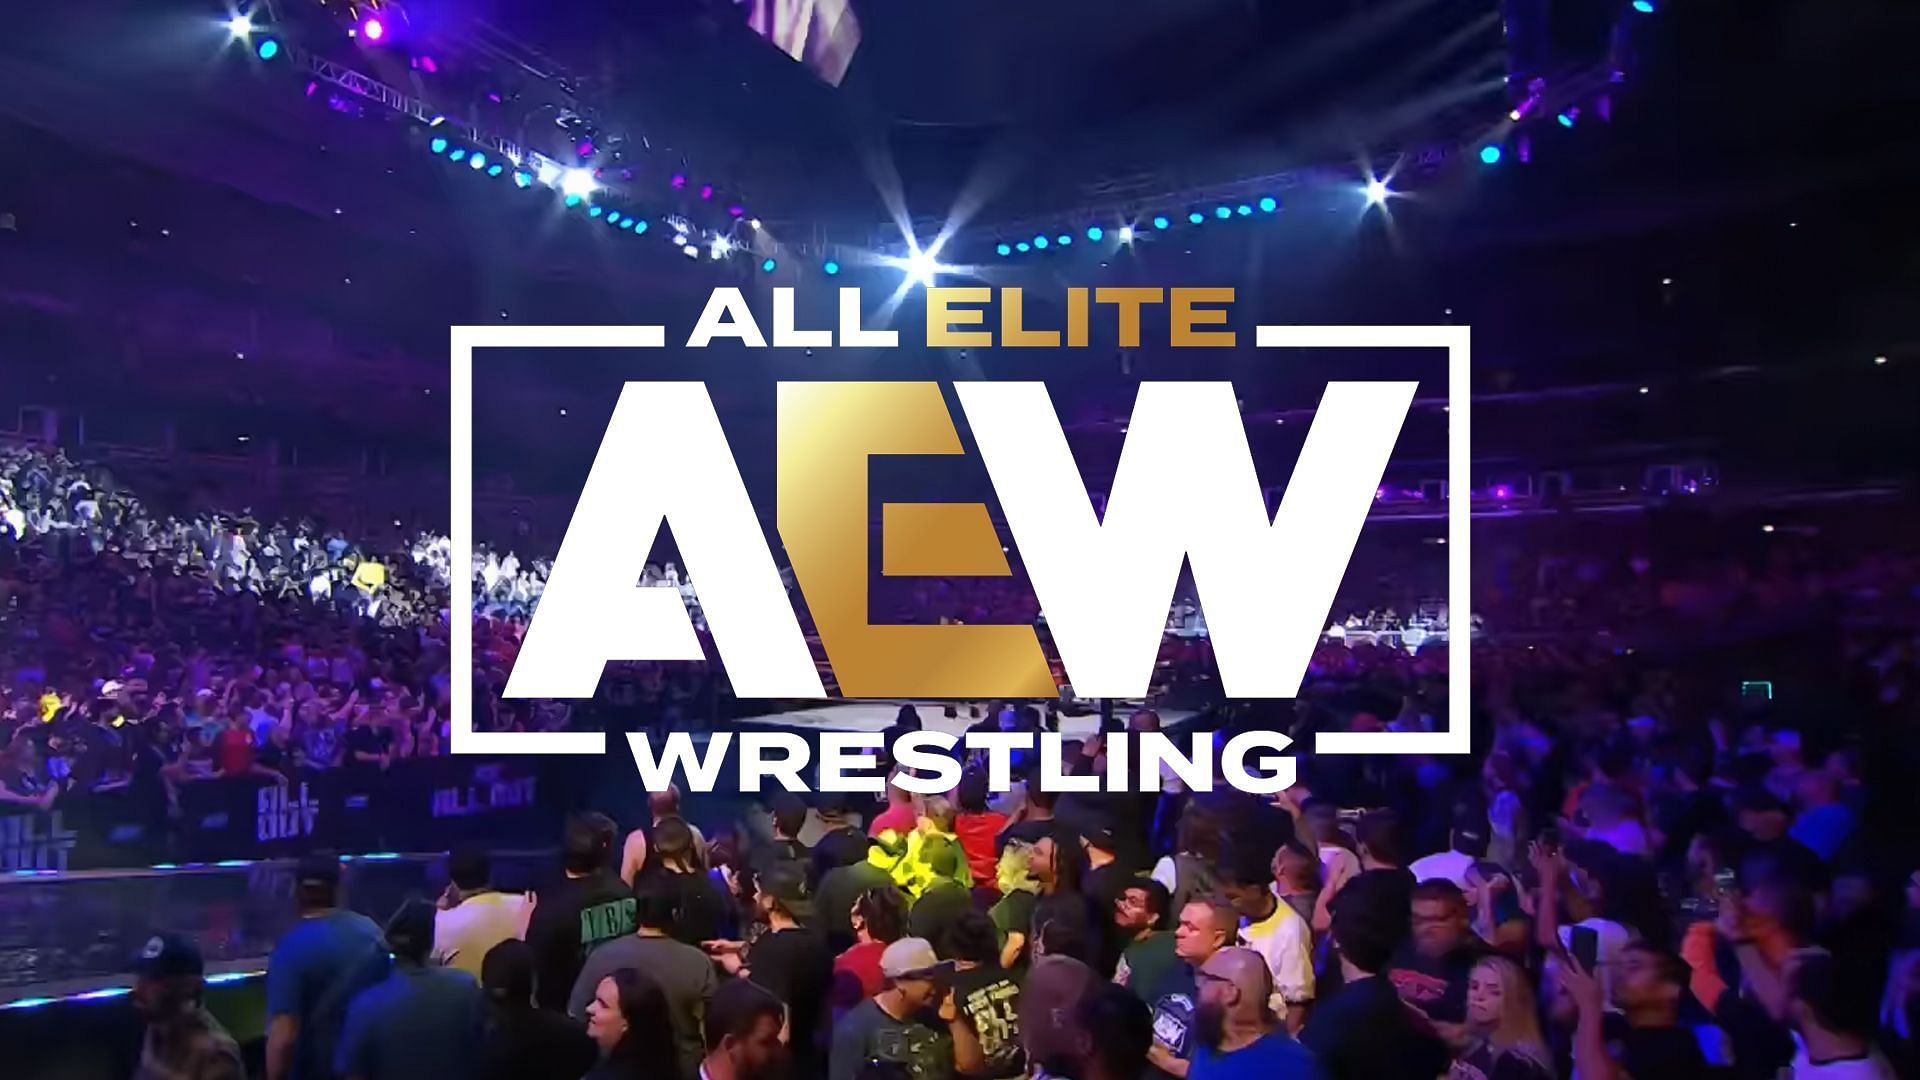 AEW is currently on a signing spree (image credit: All Elite Wrestling on YouTube)